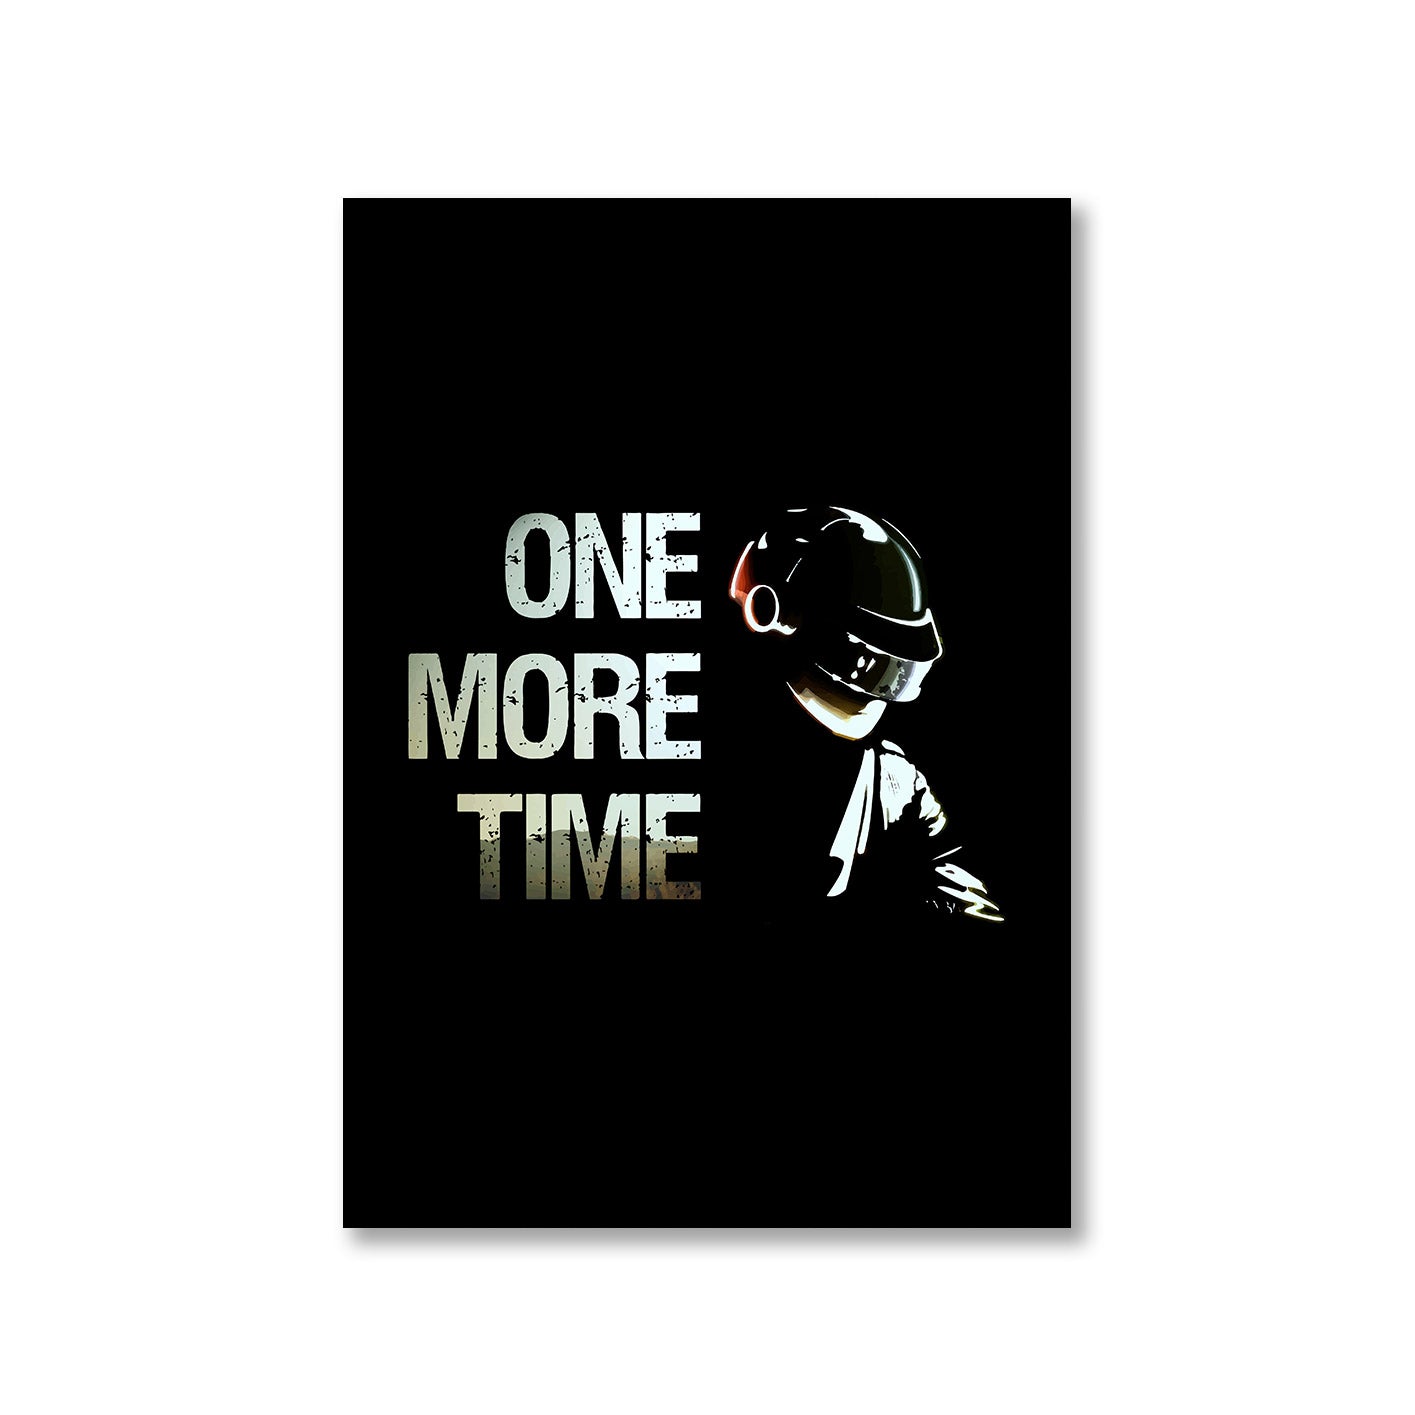 daft punk one more time poster wall art buy online india the banyan tee tbt a4